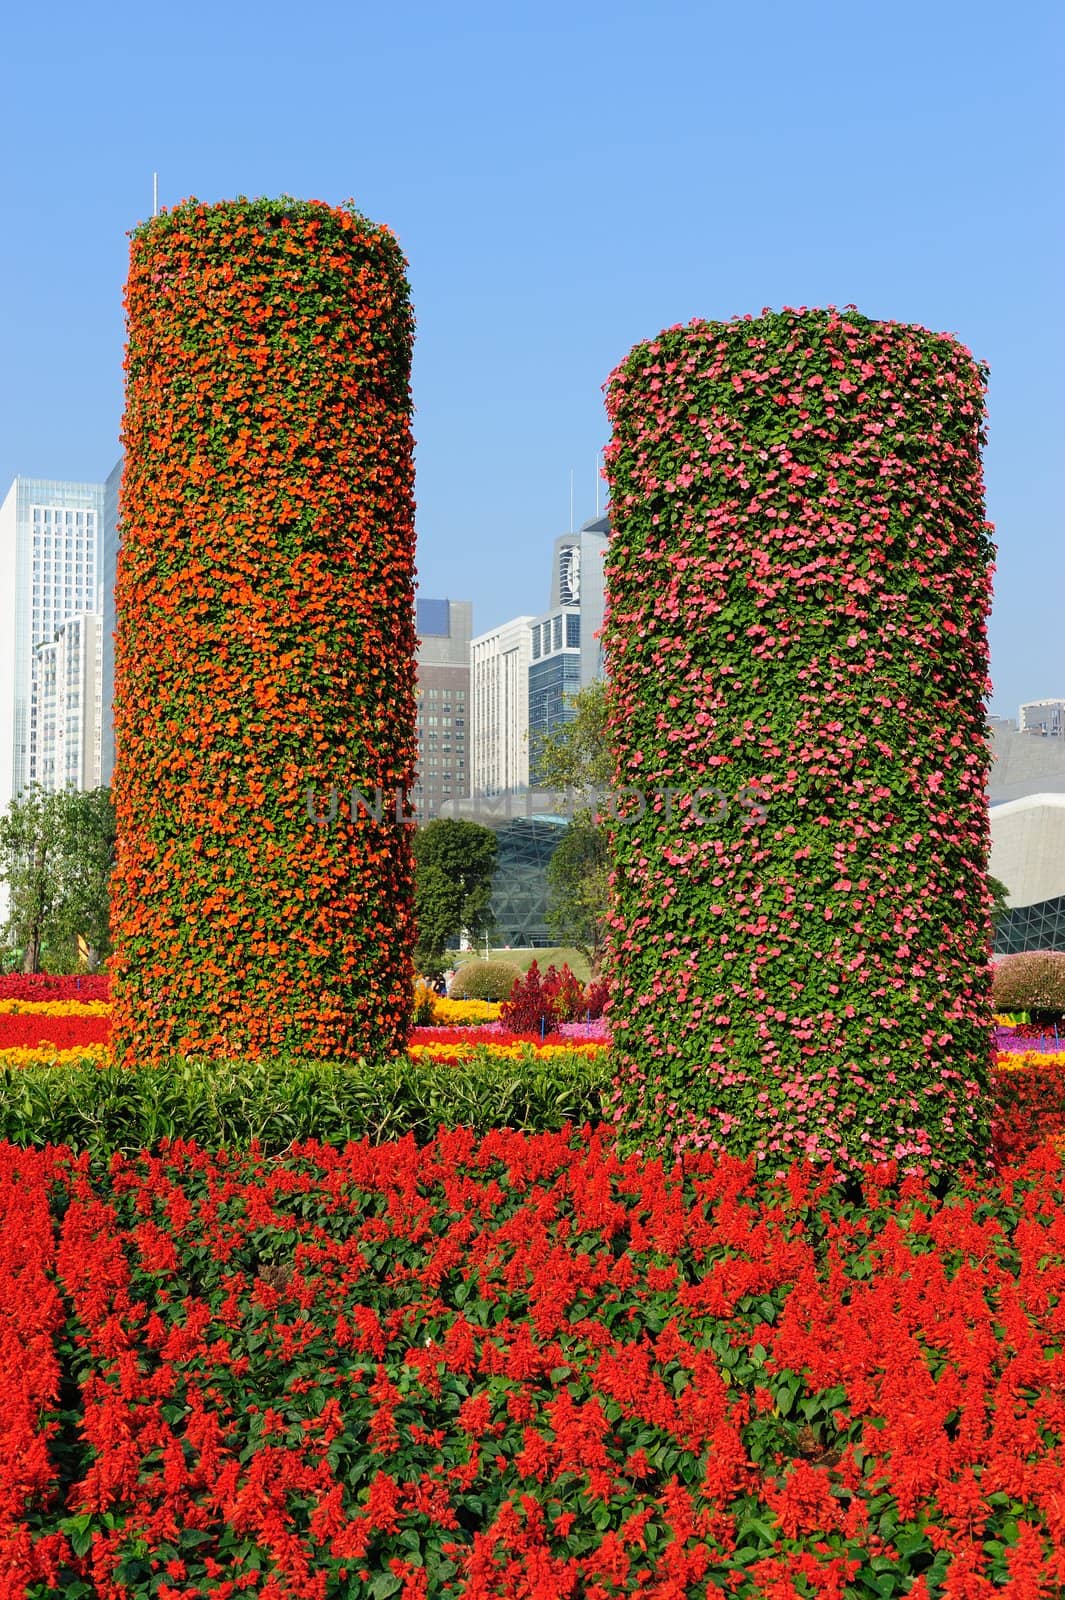 Flowers pillars in Guanghzou City Plaza